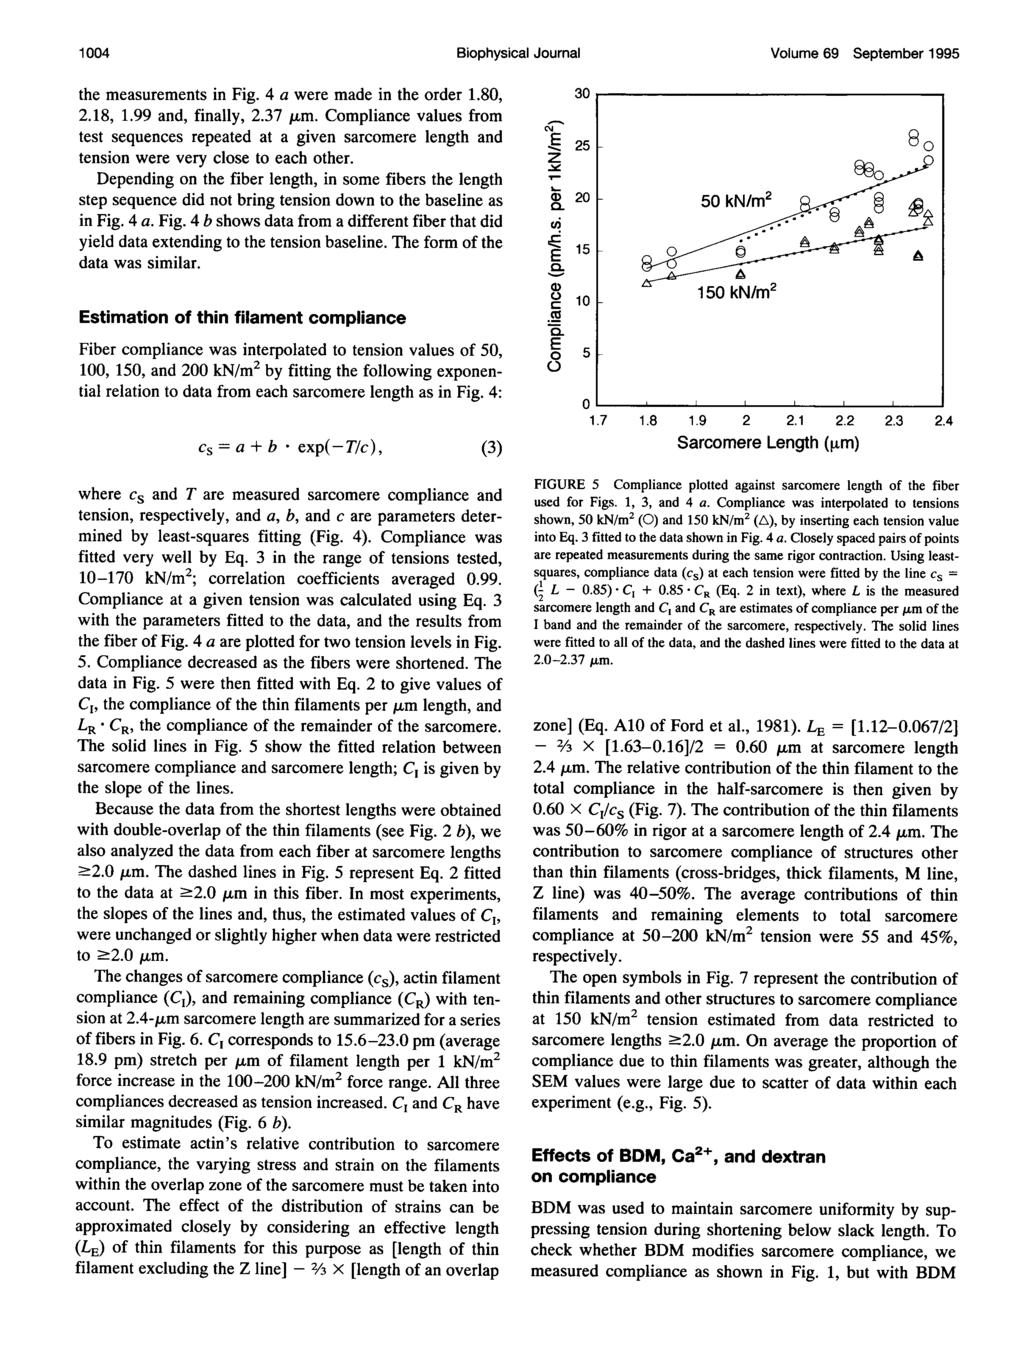 1 4 Biophysical Journal Volume 69 September 1995 the measurements in Fig. 4 a were made in the order 1.8, 2.18, 1.99 and, finally, 2.37,lm.